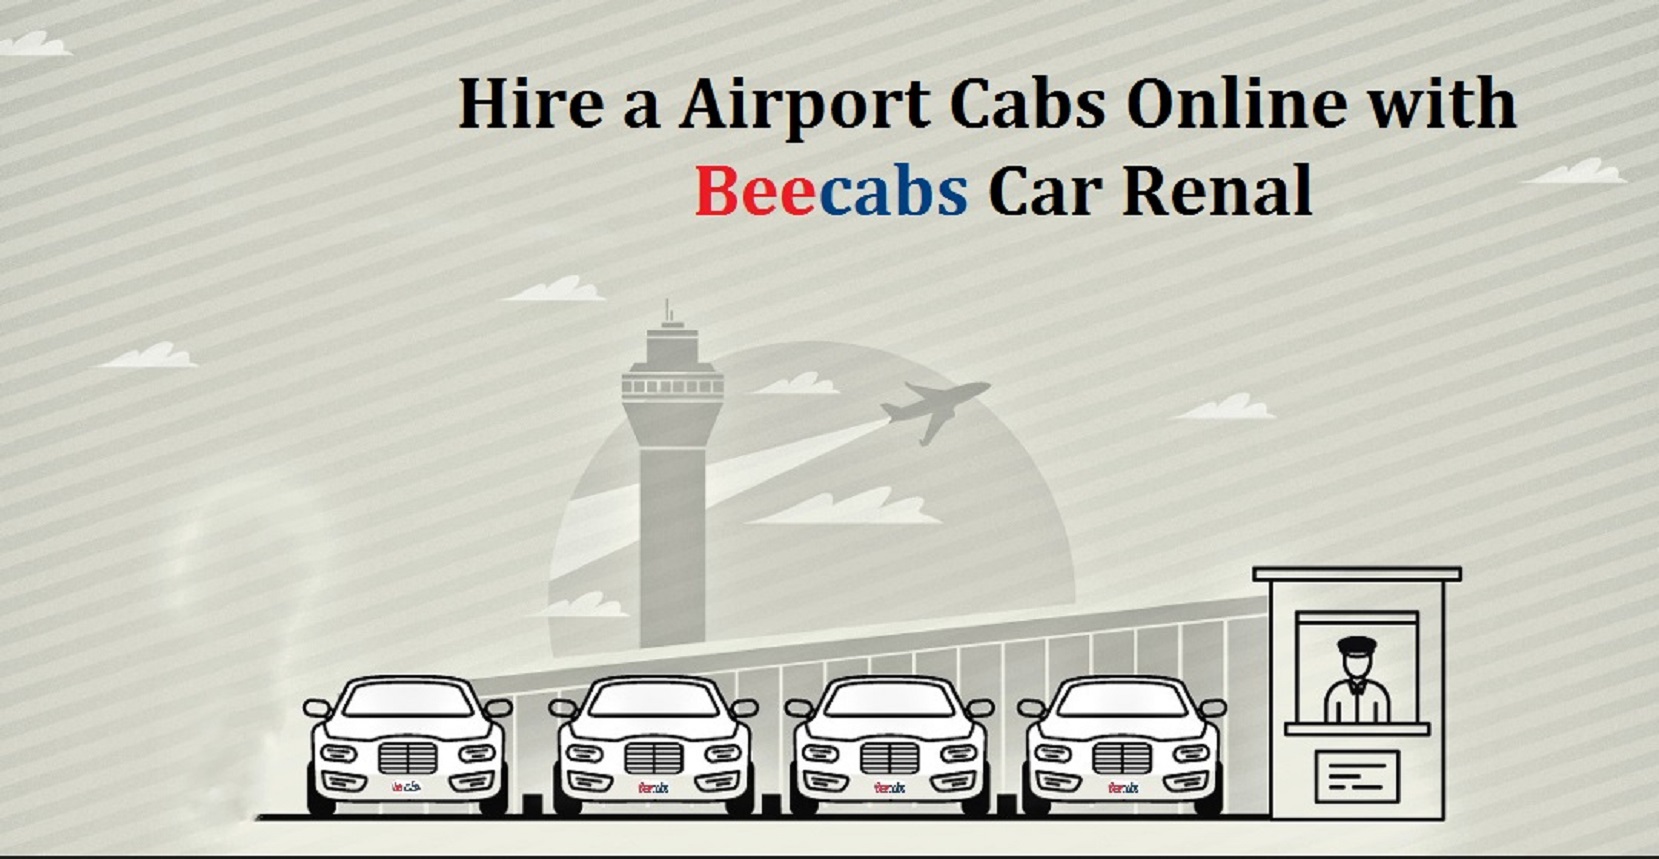 Airport Cabs - Beecabs.jpg  by beecabs